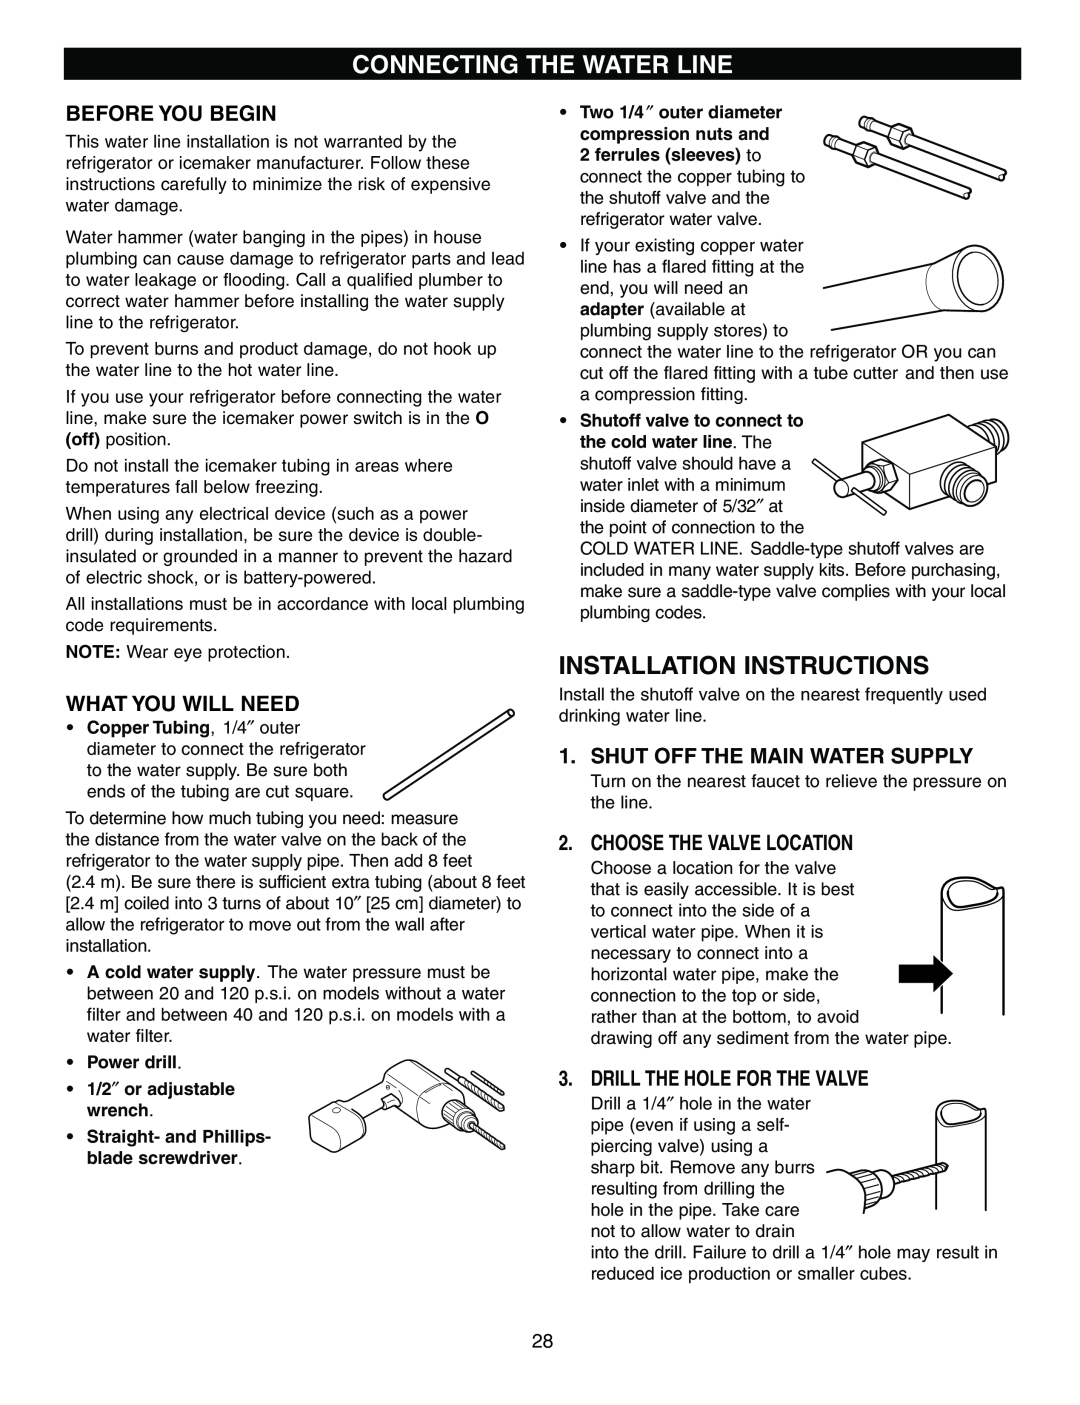 LG Electronics LRFD25850 manual Connecting The Water Line, Installation Instructions, Before You Begin, What You Will Need 